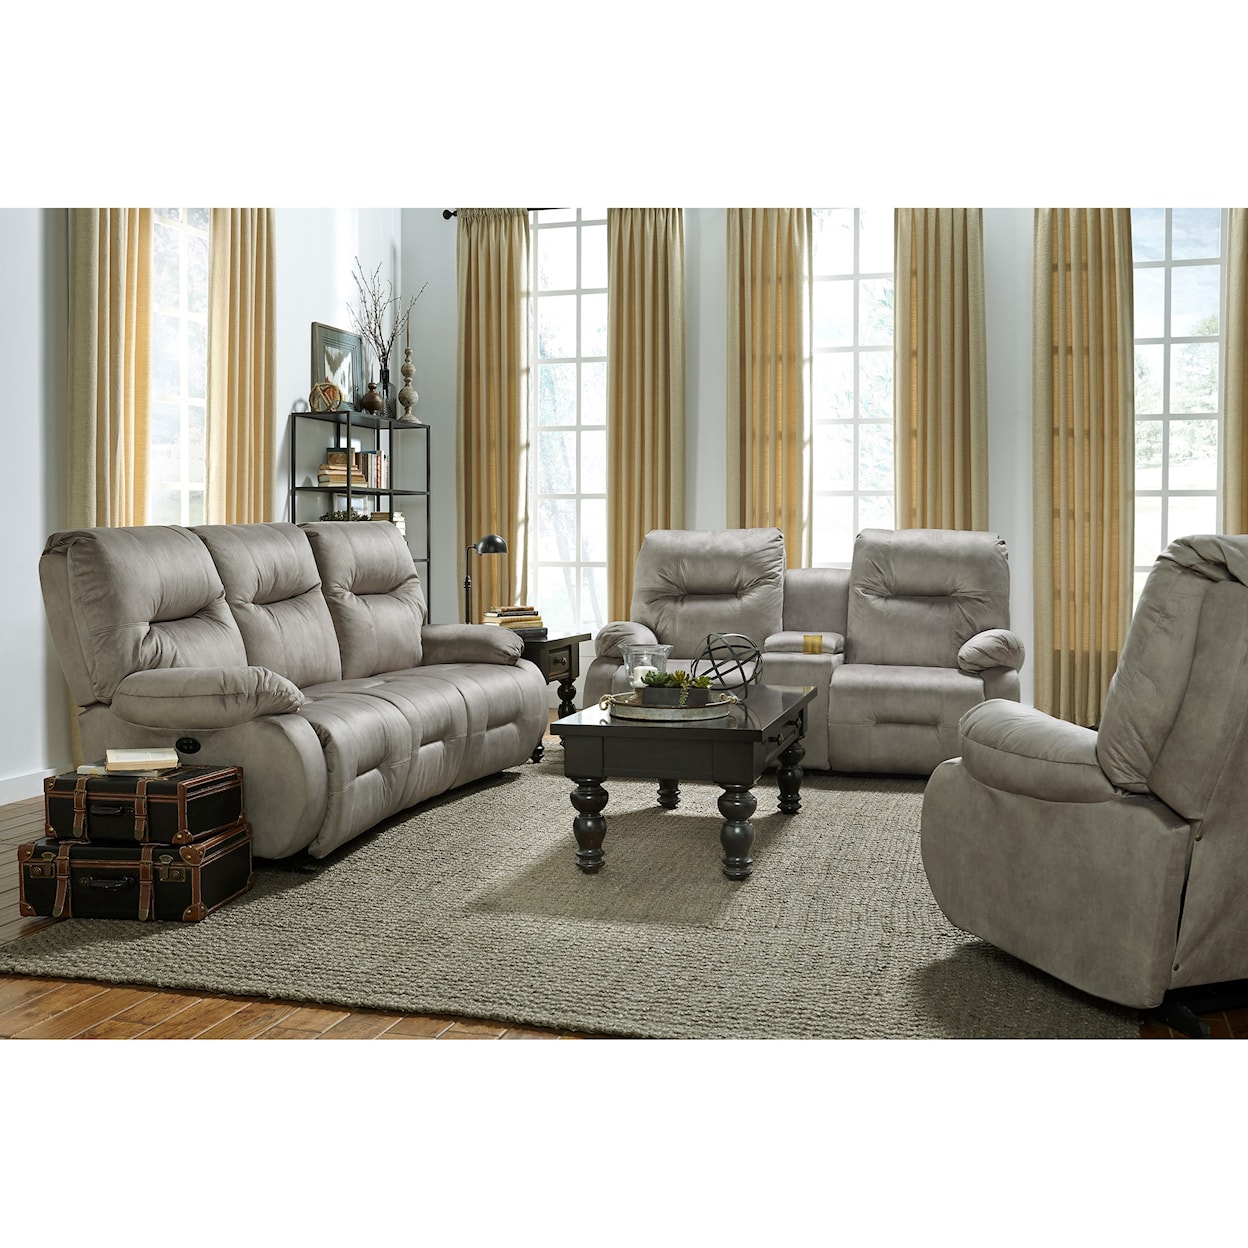 Best Home Furnishings Brinley 2 Space Saver Console Loveseat